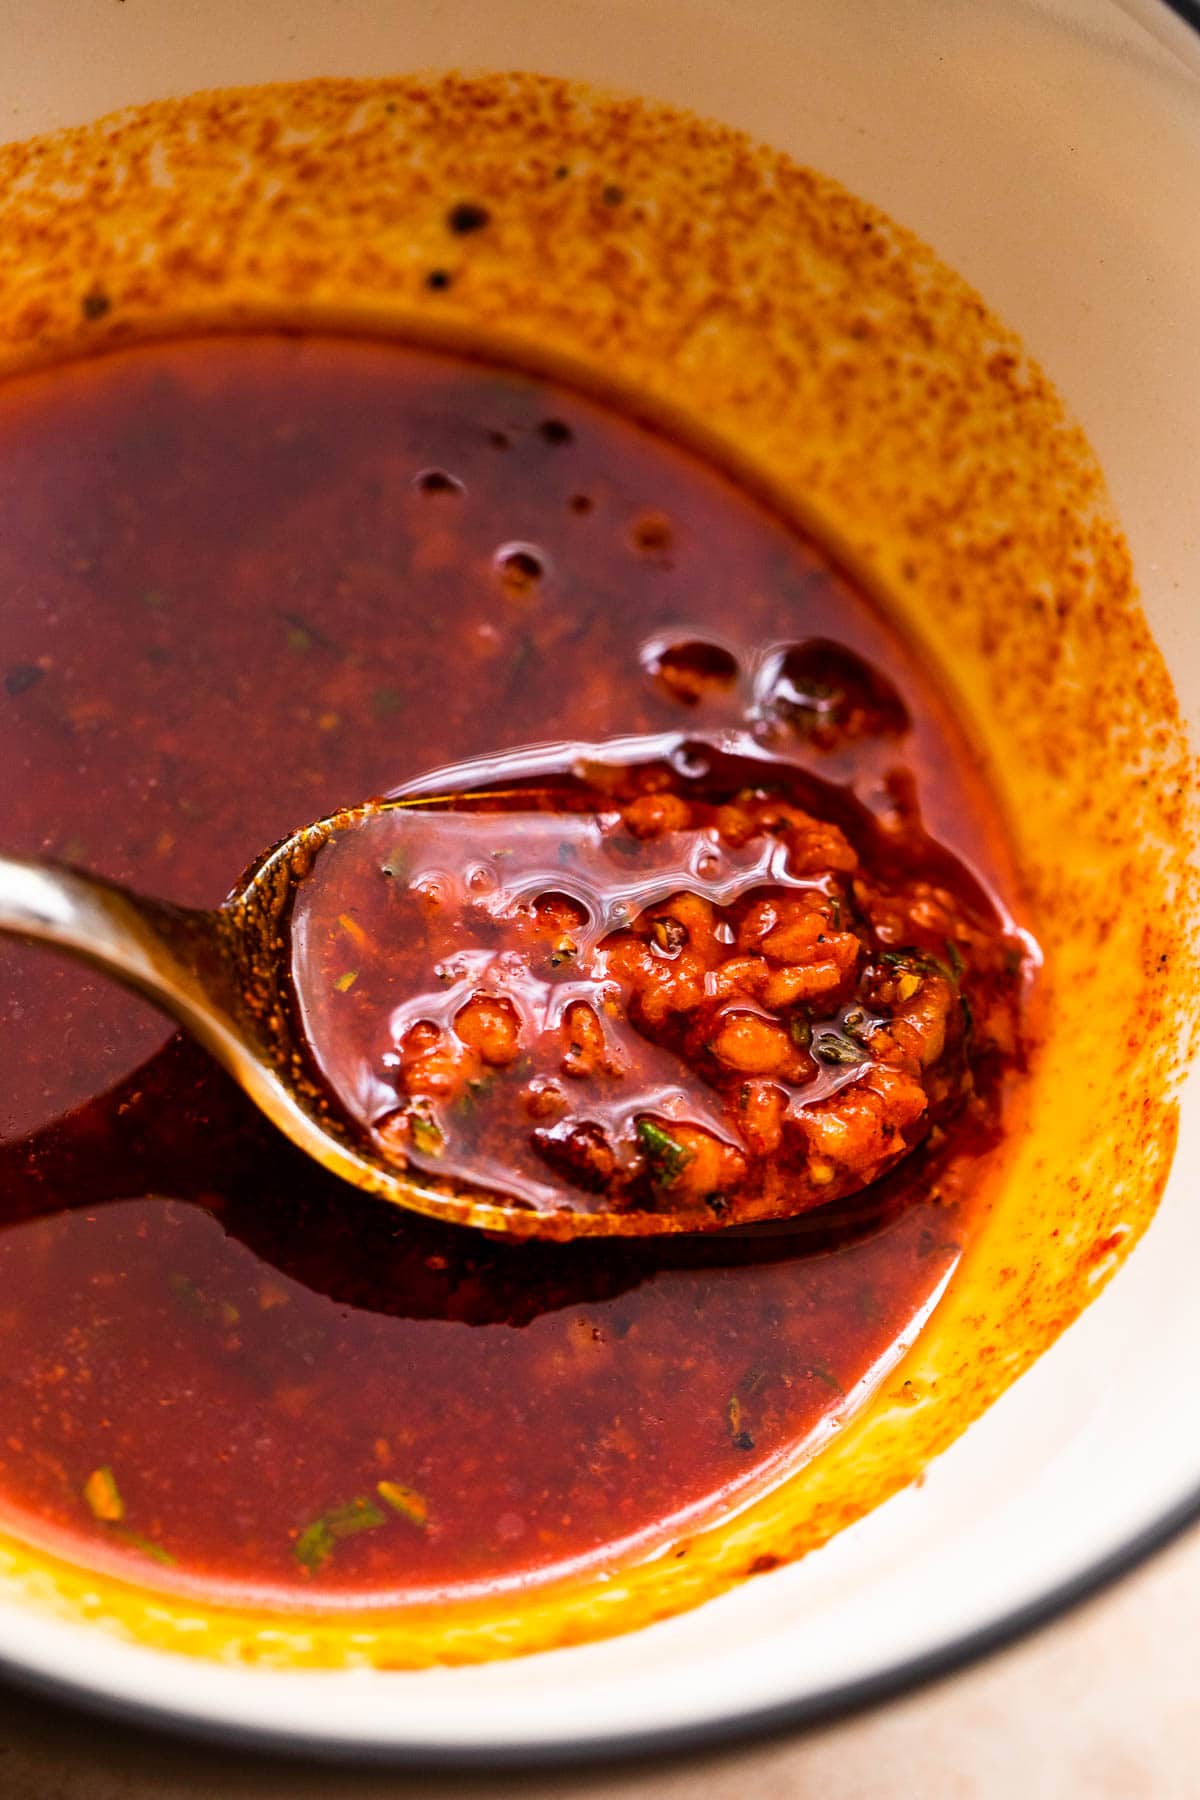 A spoon stirring through a mixture of cooking oil with garlic and paprika.